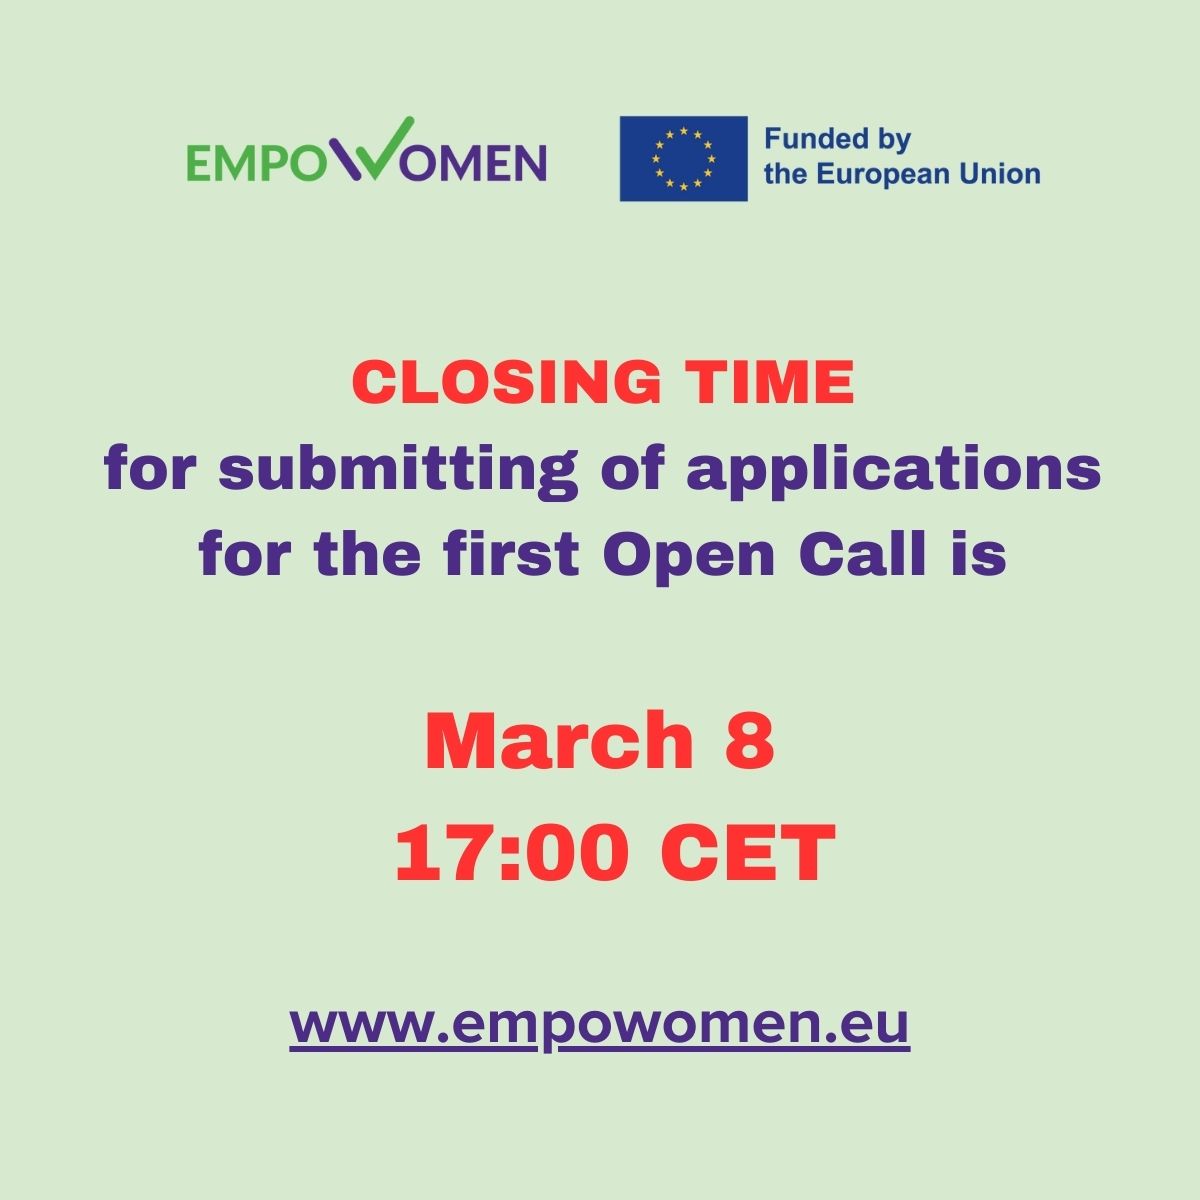 Please remember that on Friday, March, 8, at 17:00 Brussels Time, we stop accepting applications within the first Open Call for the EmpoWomen Program.

empowomen.eu

#EmpoWomen #WomeninTech #DeepTech #Investment